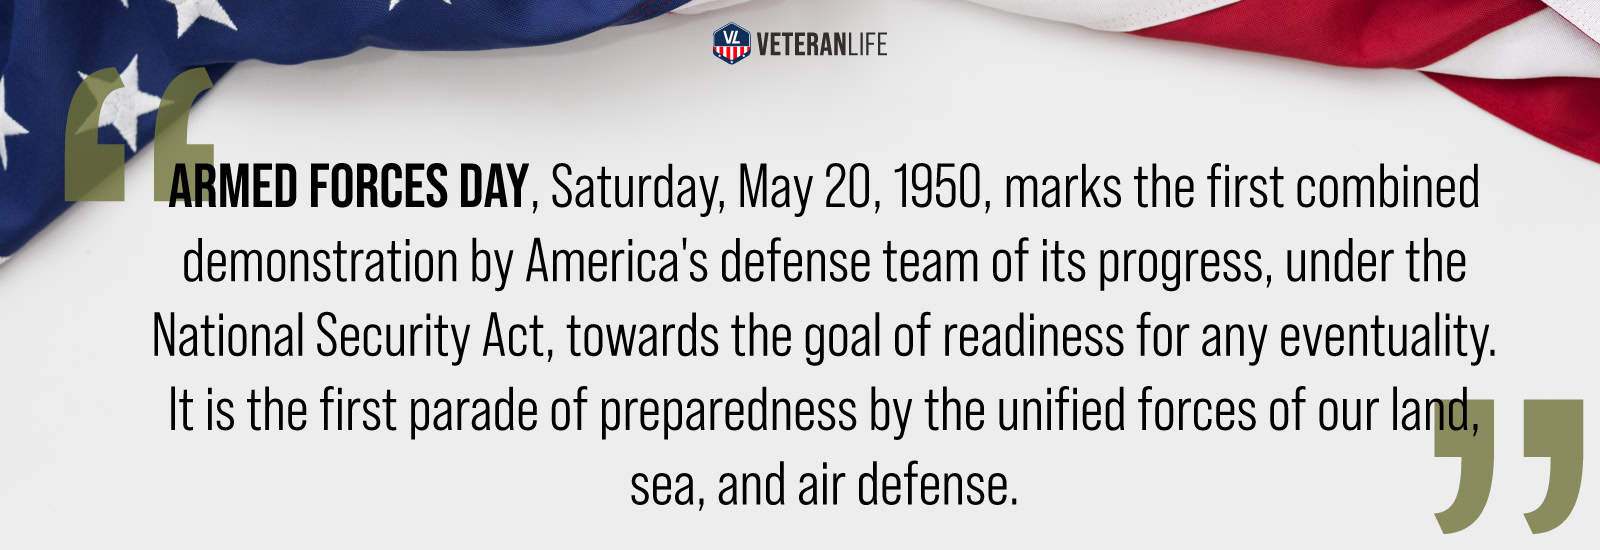 “Armed Forces Day, Saturday, May 20, 1950, marks the first combined demonstration by America's defense team of its progress, under the National Security Act, towards the goal of readiness for any eventuality. It is the first parade of preparedness by the unified forces of our land, sea, and air defense.”